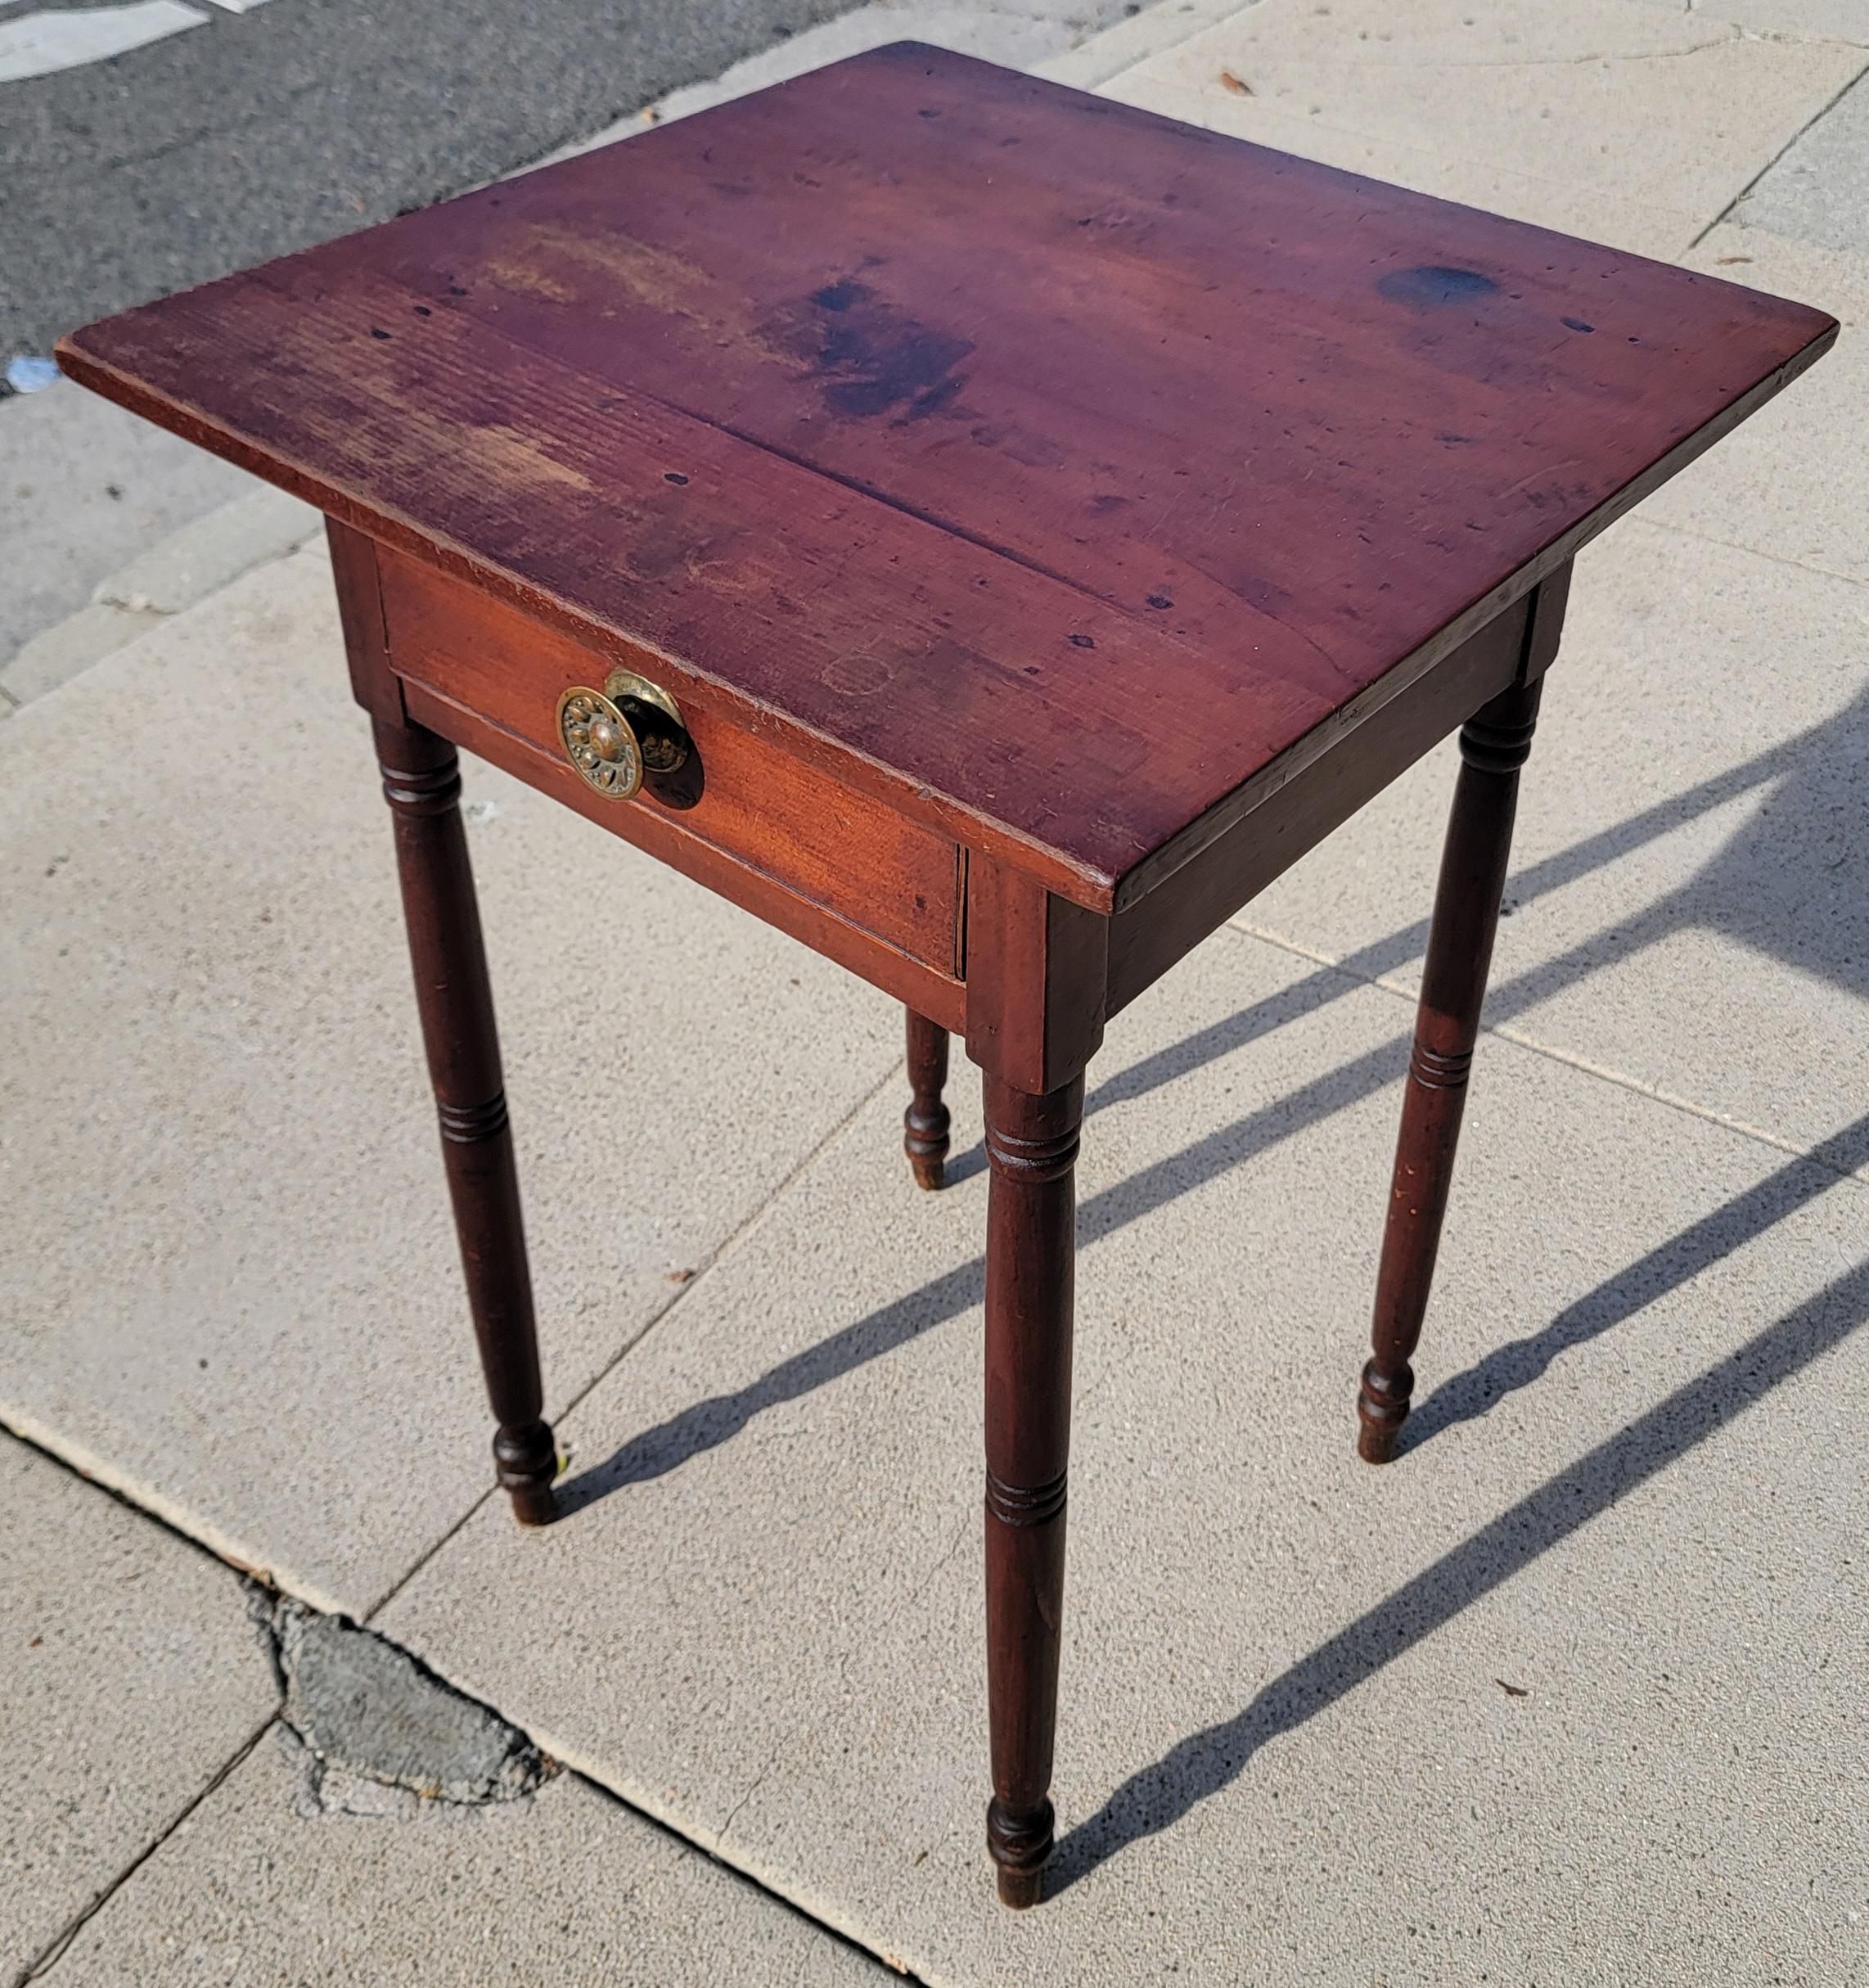 19Thc Ranch house side table or night stand.This fine walnut night stand or side table is in fine sturdy condition.